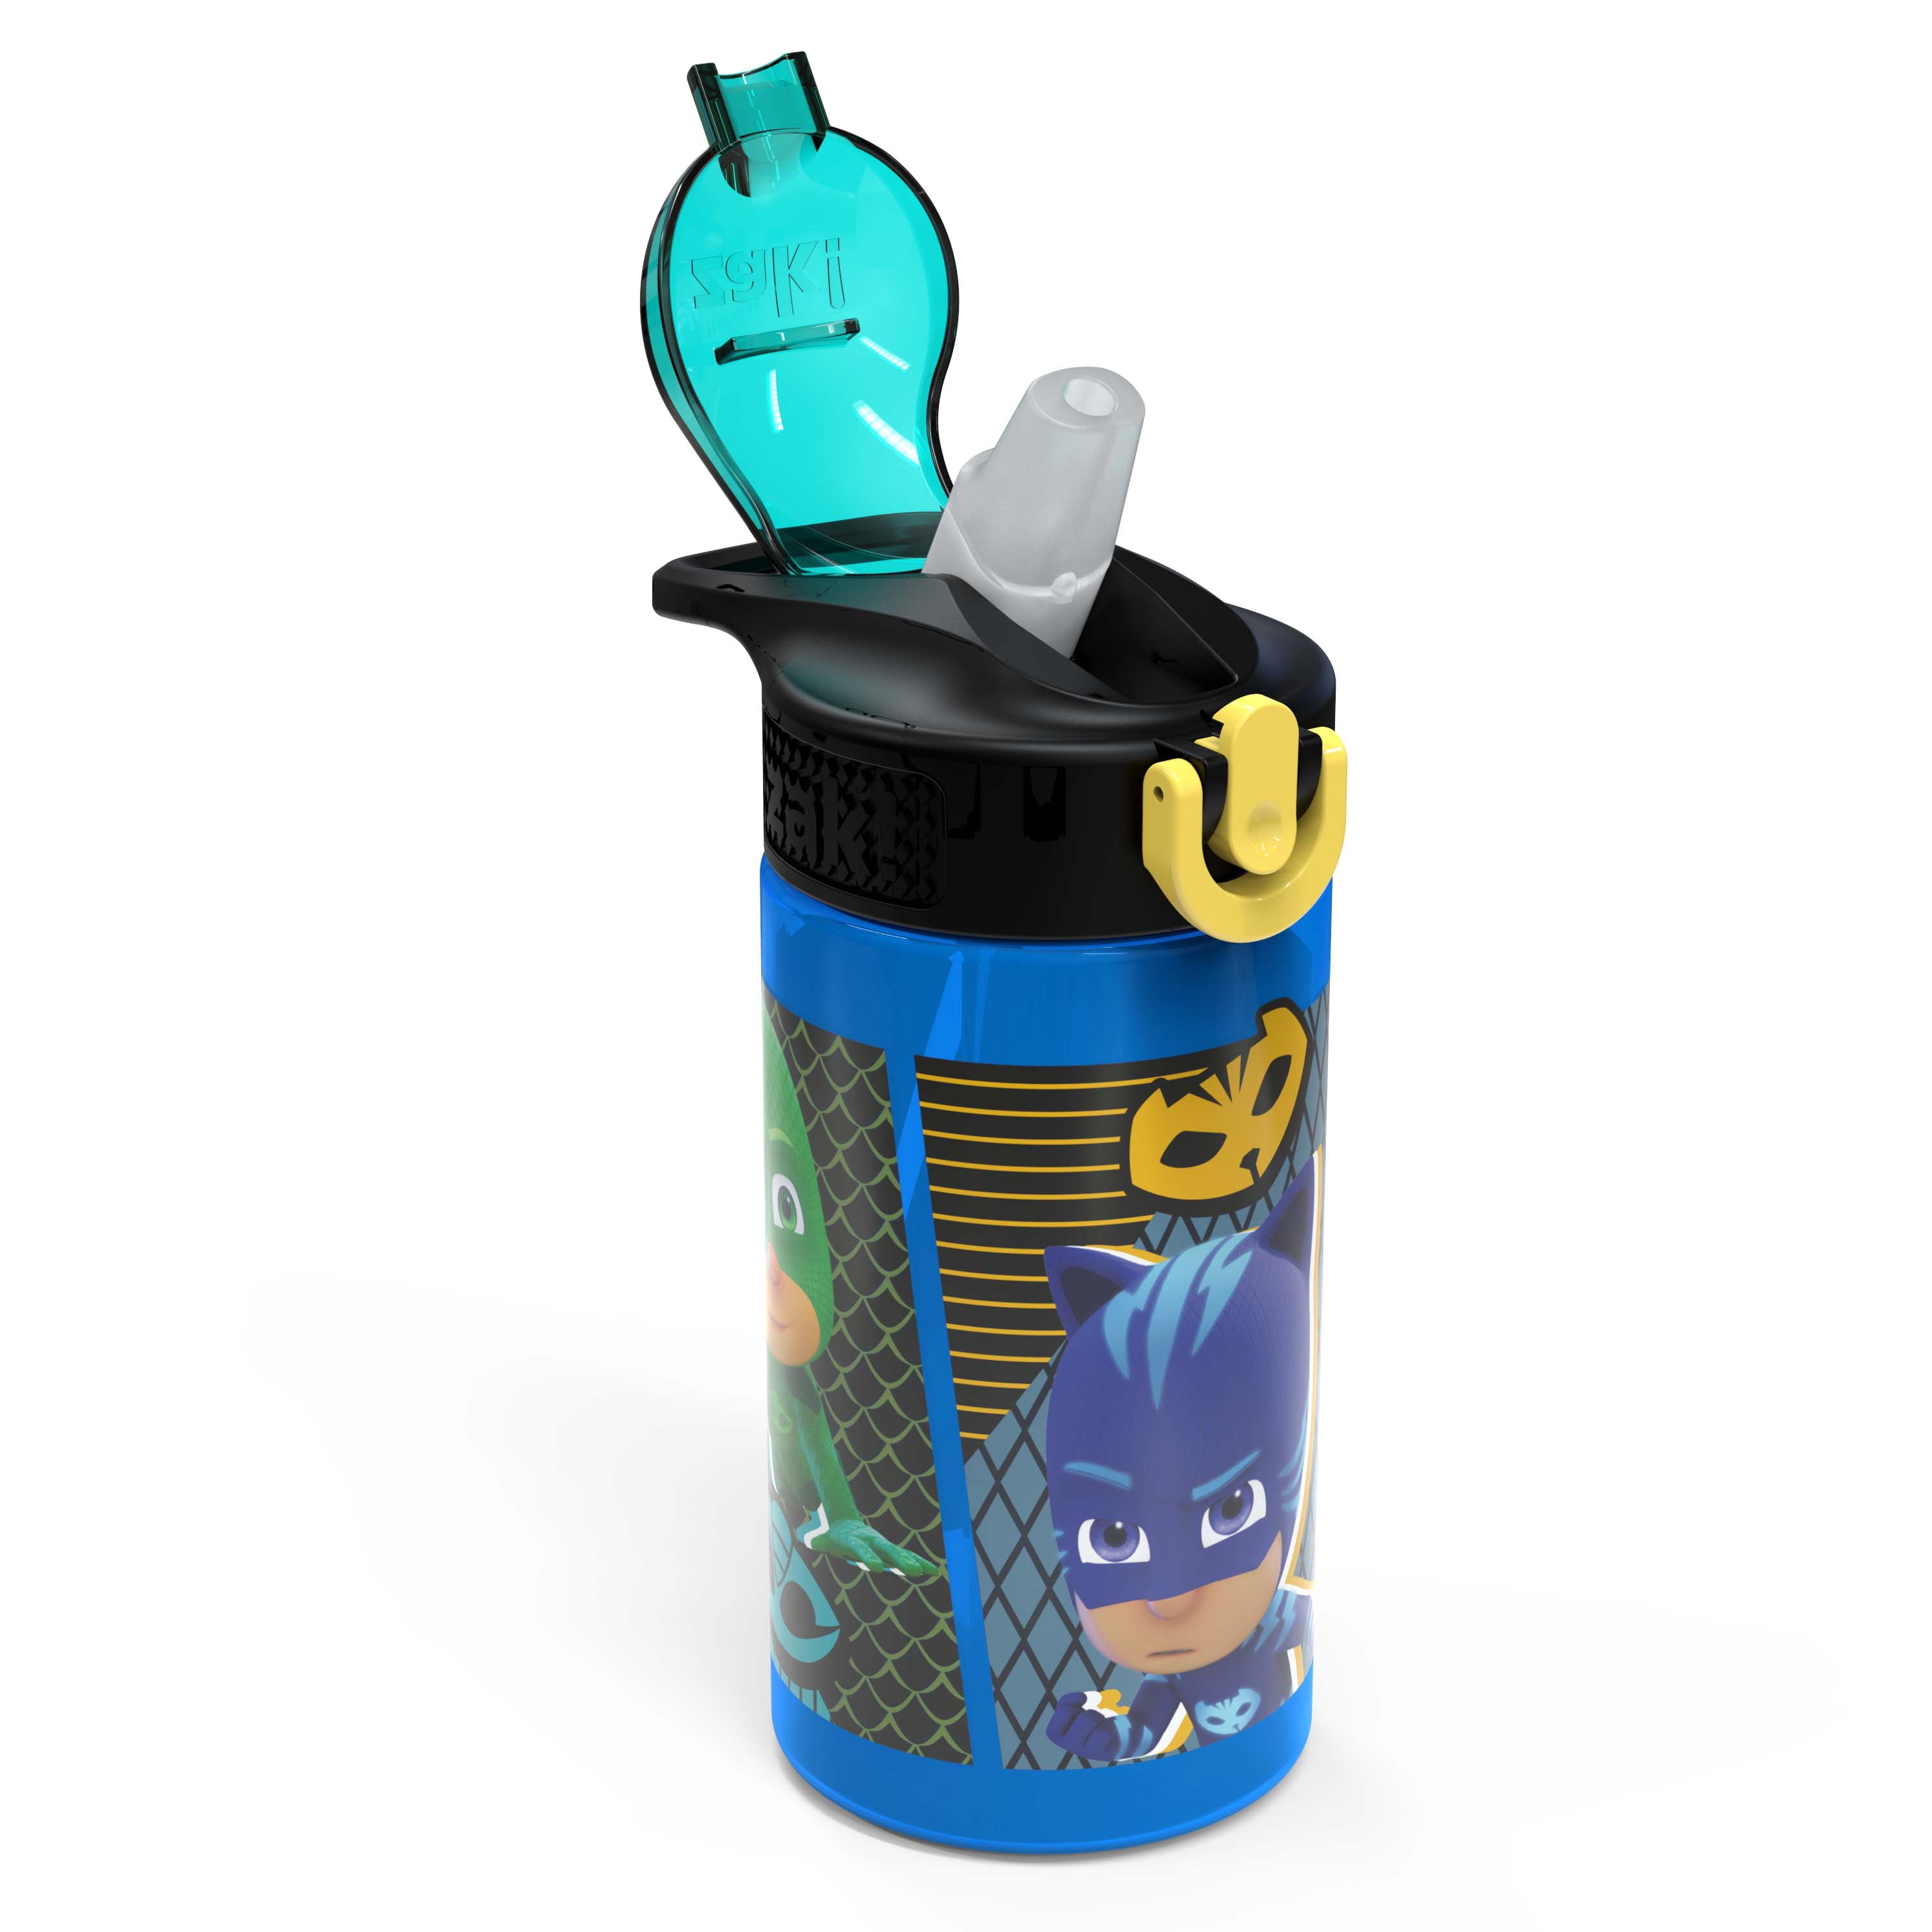 TOYBARN : PJ Masks Themed Drink Tumbler with Lid and Straw 2-Pc Set - 16 oz